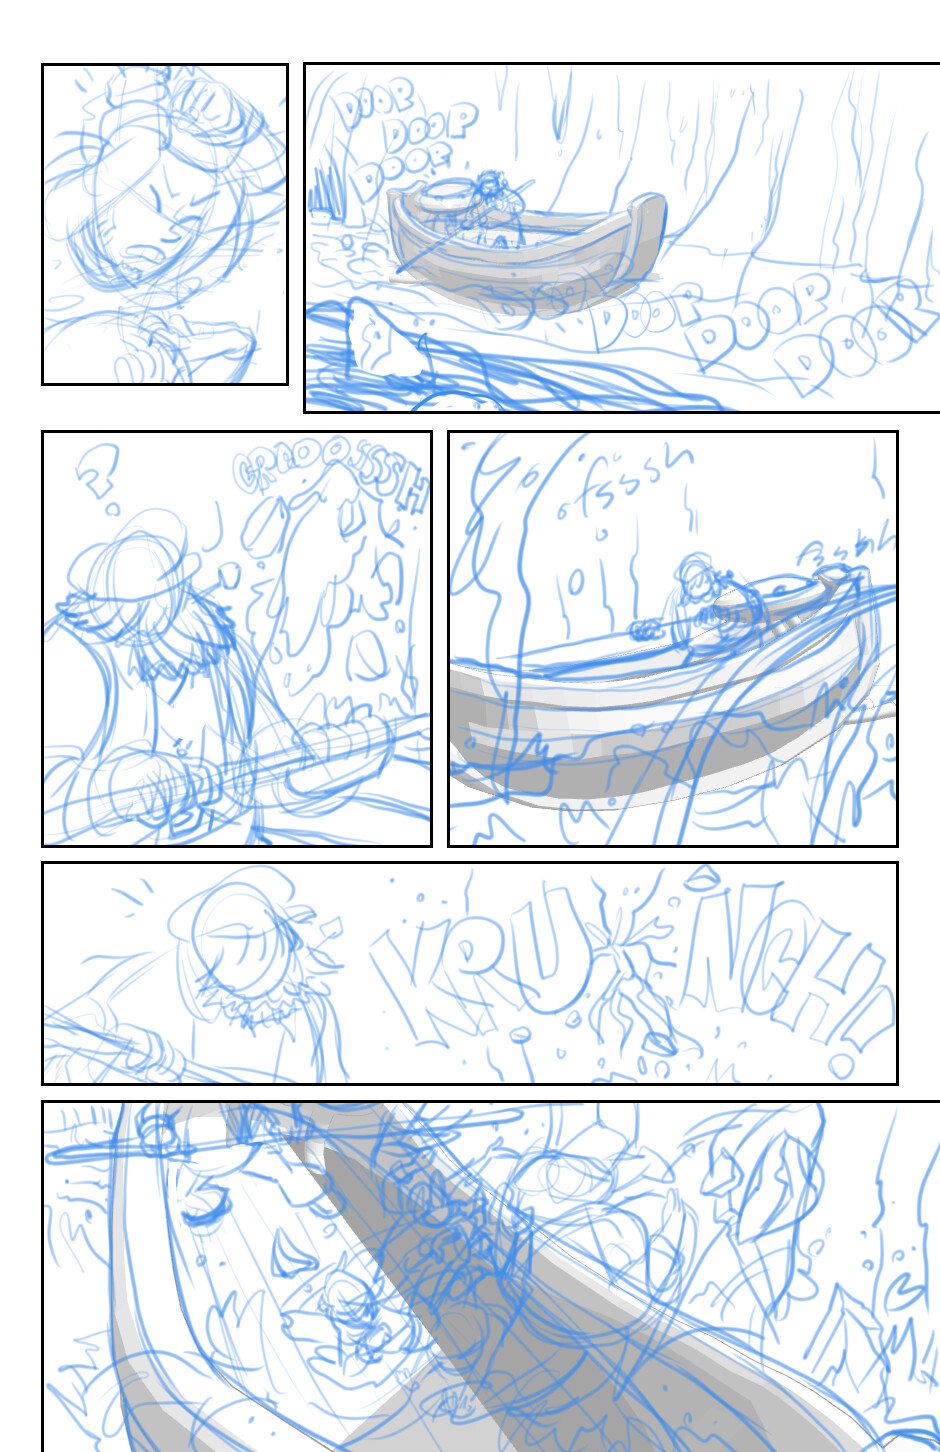 page 39 pencils - you can see the boat model in reference positions